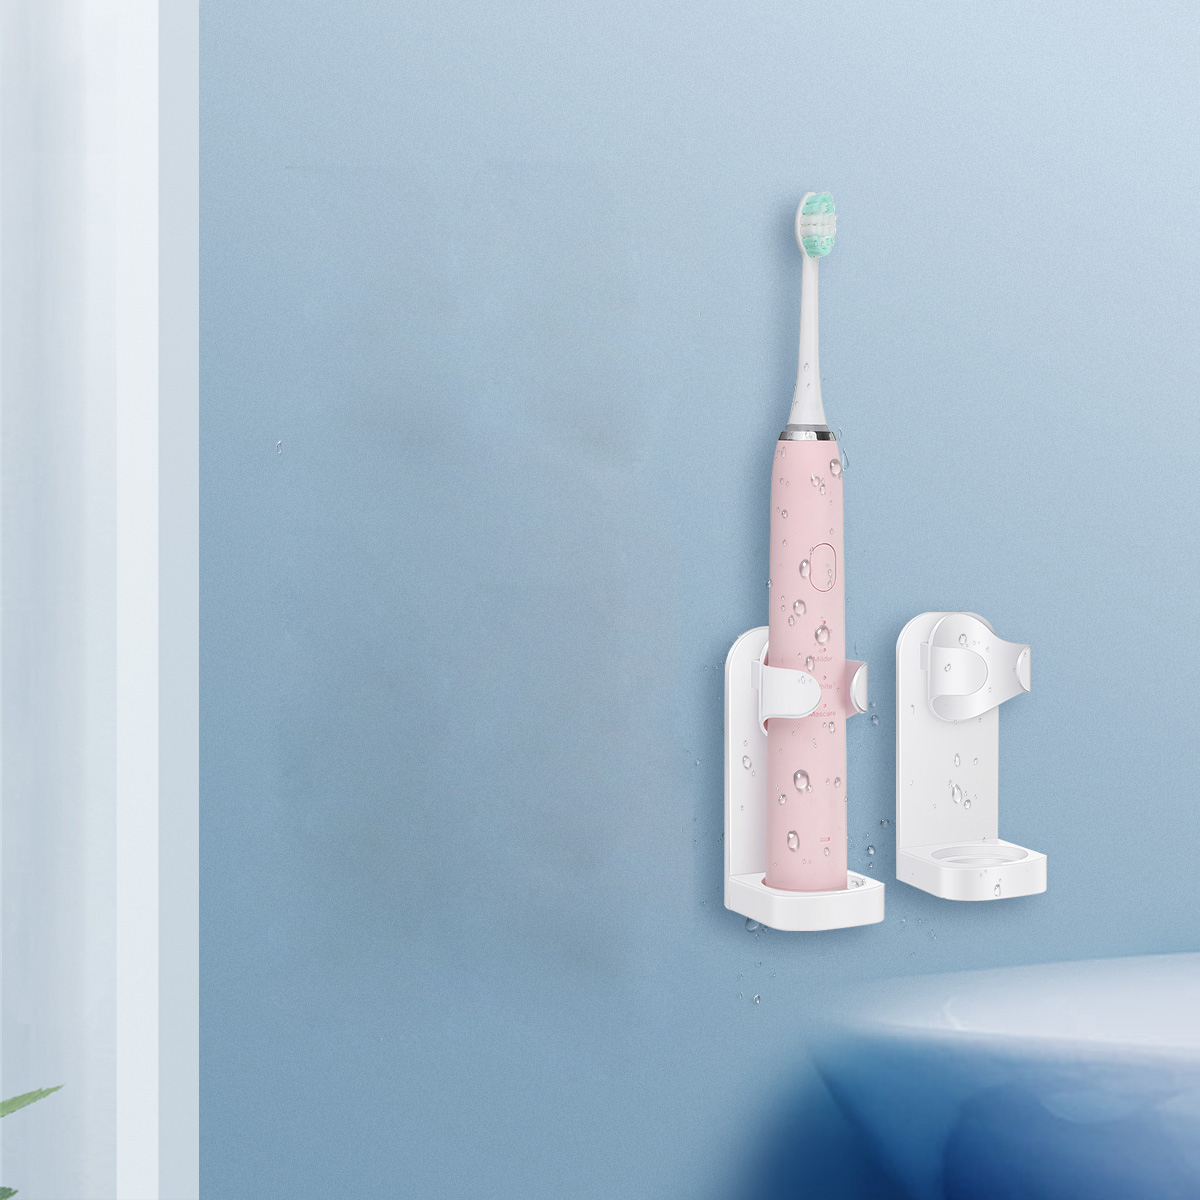 Wall Mounted Electric Toothbrush Holder Bathroom Holder Bracket Plastic Products Toothpaste Storage Rack